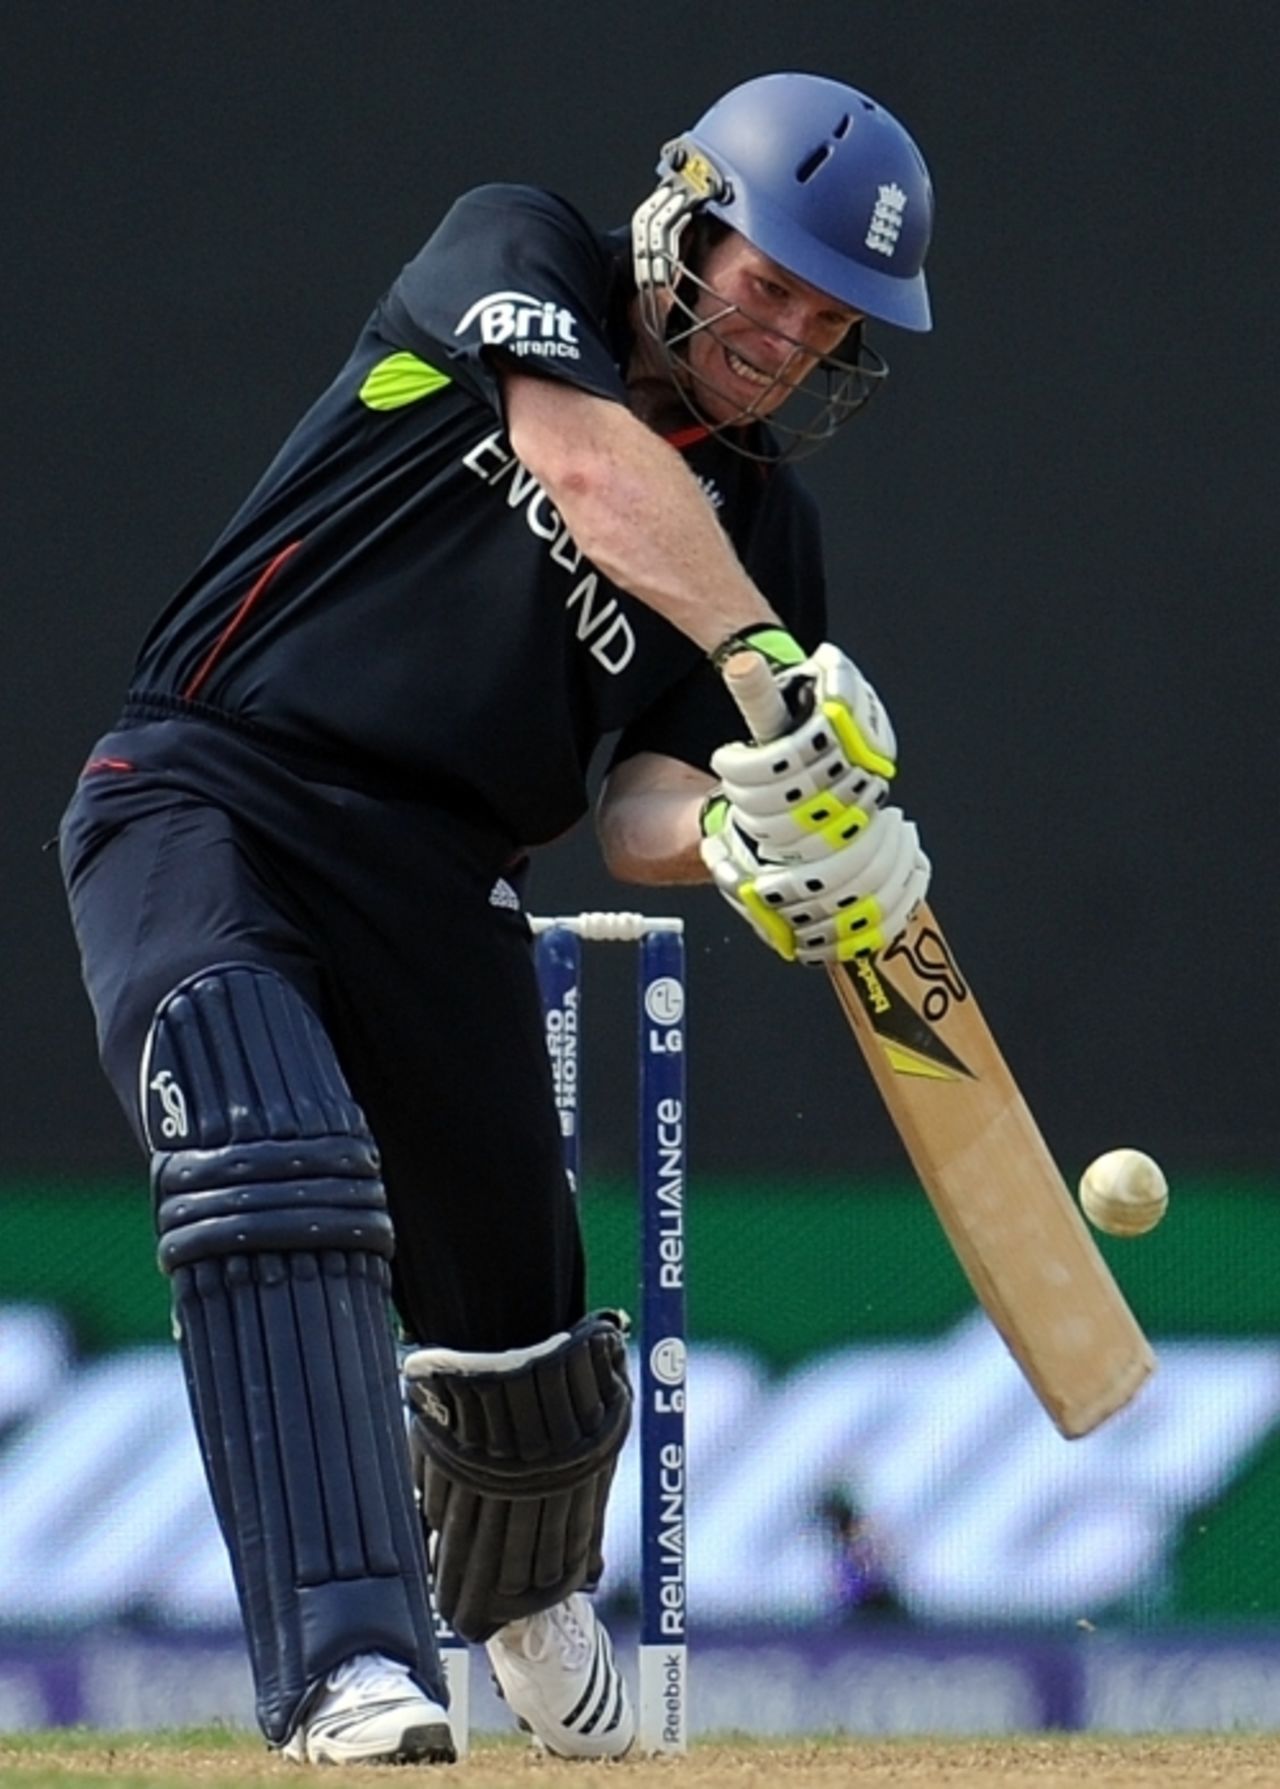 Eoin Morgan cracked 55 from 35 balls to seize the momentum in England's favour, West Indies v England, World Twenty20, Guyana, May 3, 2010